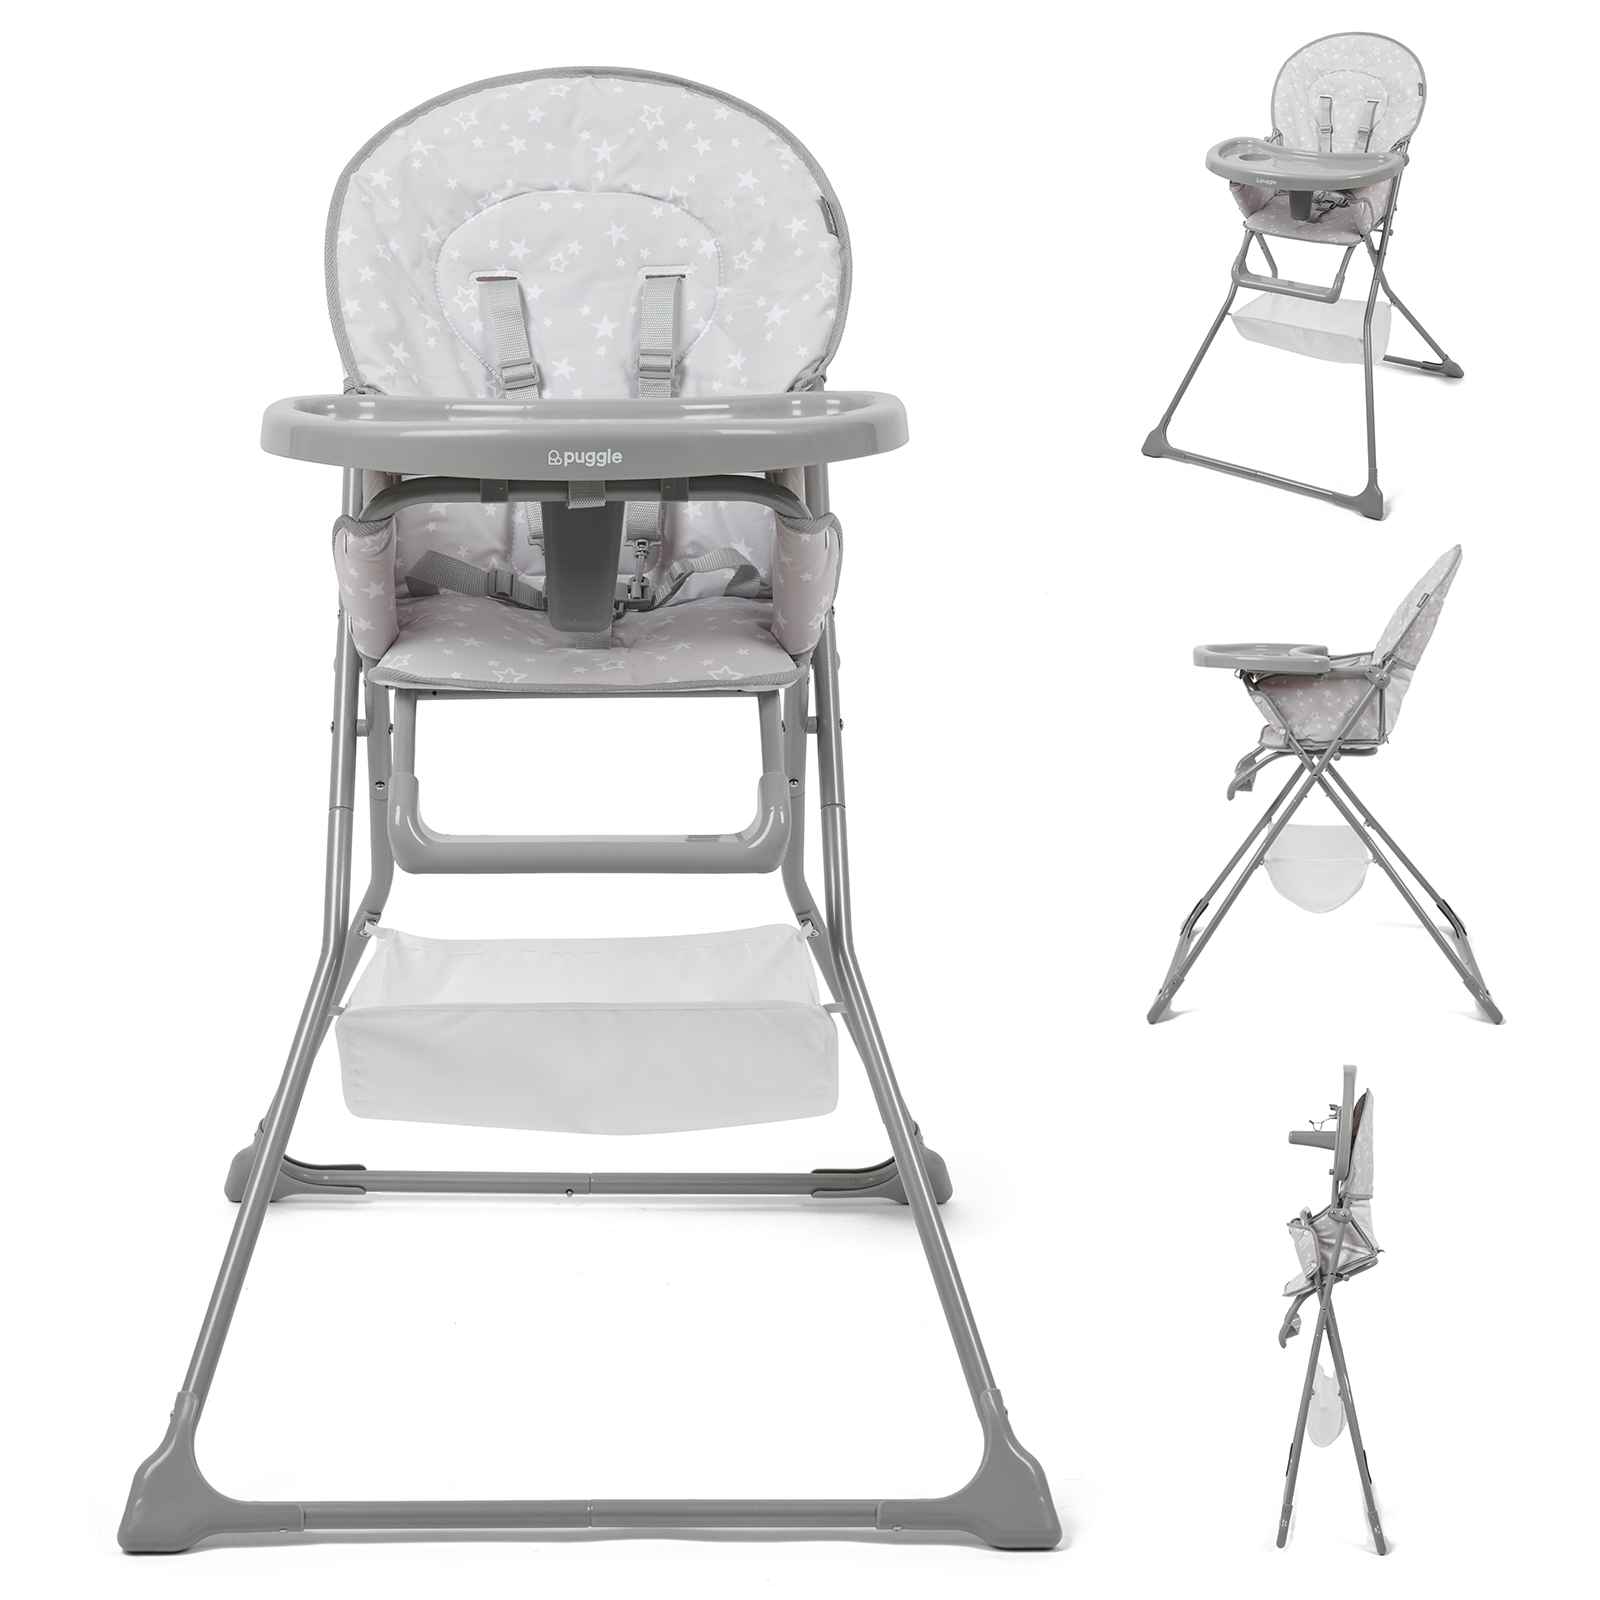 Puggle Dine & Go Luxe Baby Highchair - Scattered Stars Grey